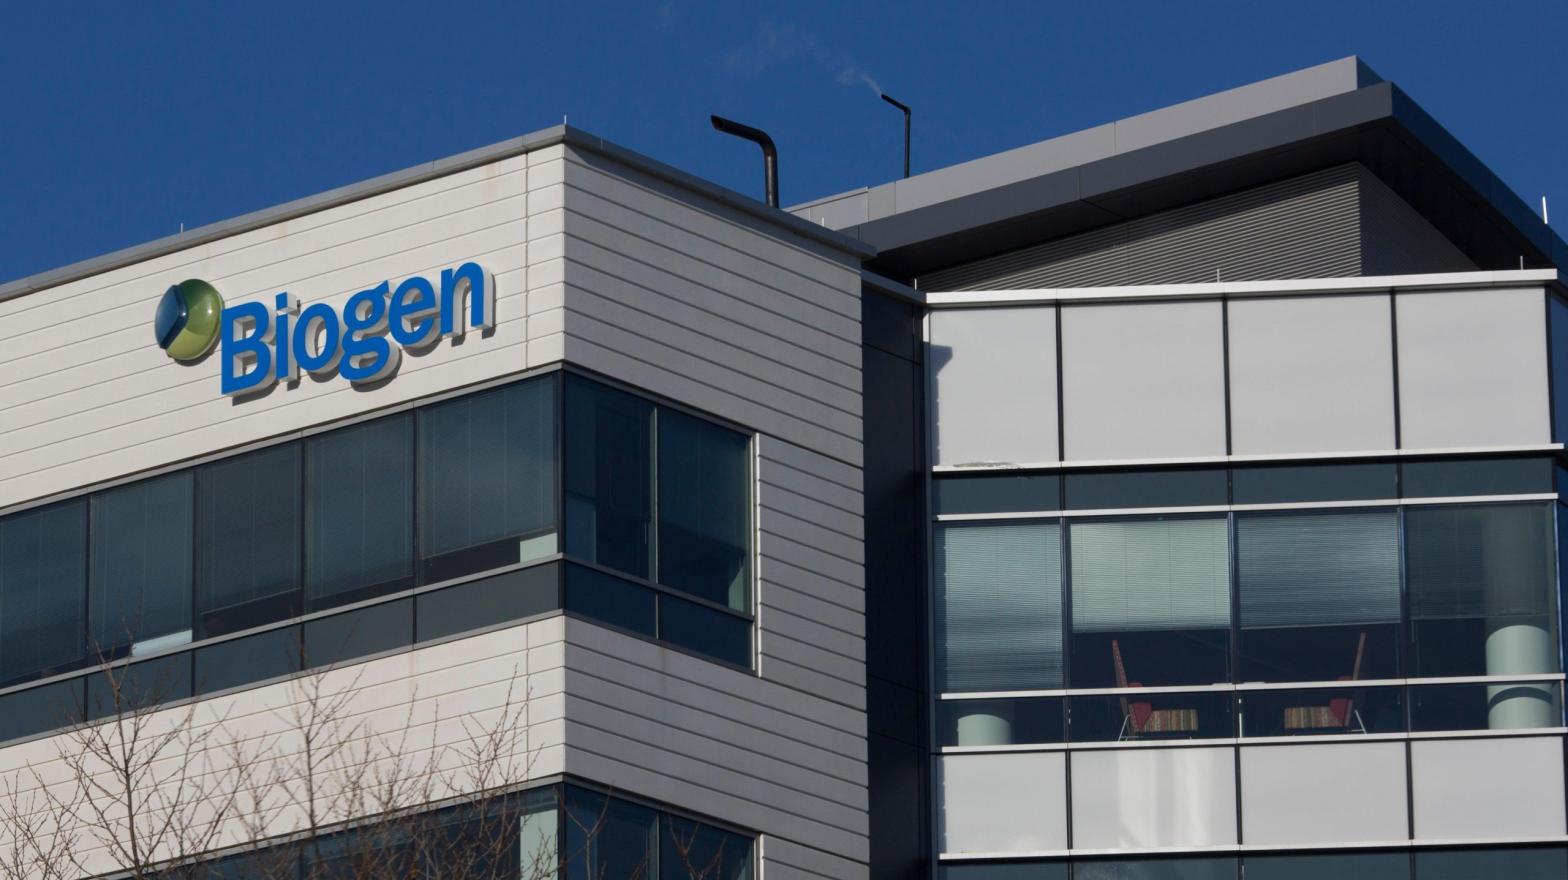 A sign for biotechnology company, Biogen, Inc. is seen on a building in Cambridge, Massachusetts, on March 18, 2017 (Photo: Dominick Reuter, Getty Images)